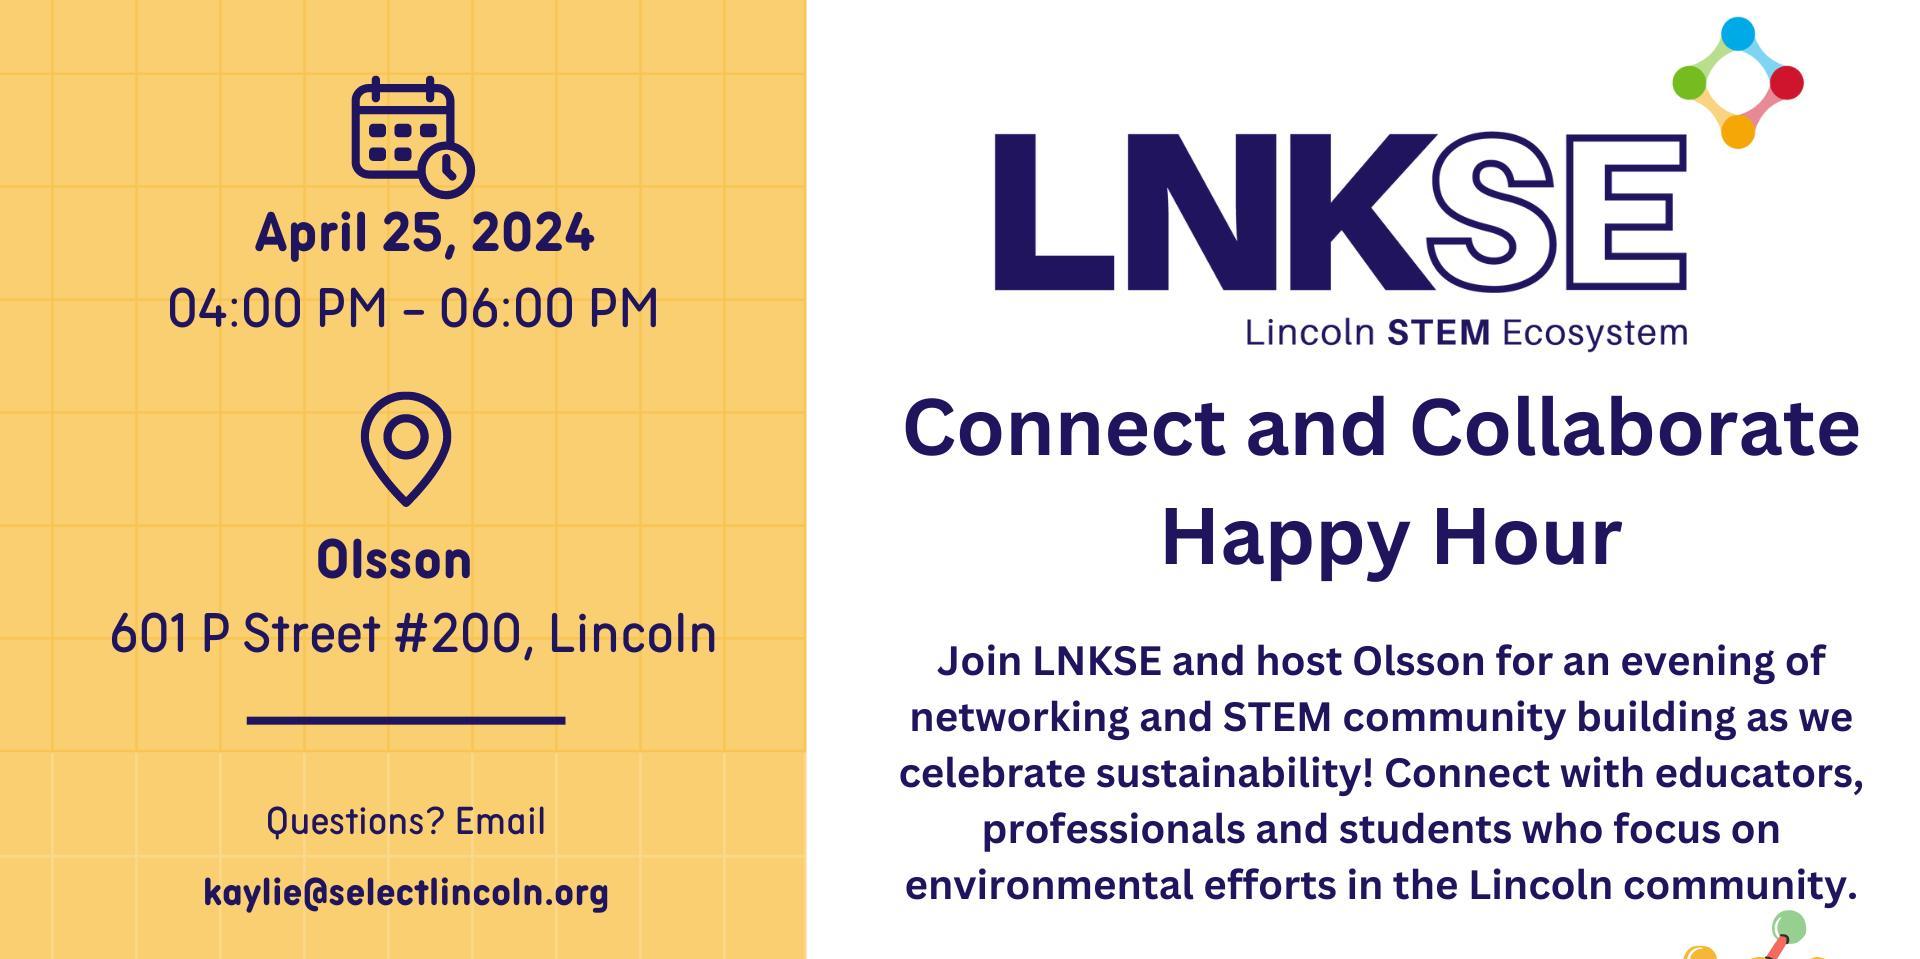 Connect and Collaborate Happy Hour with LNKSE promotional image